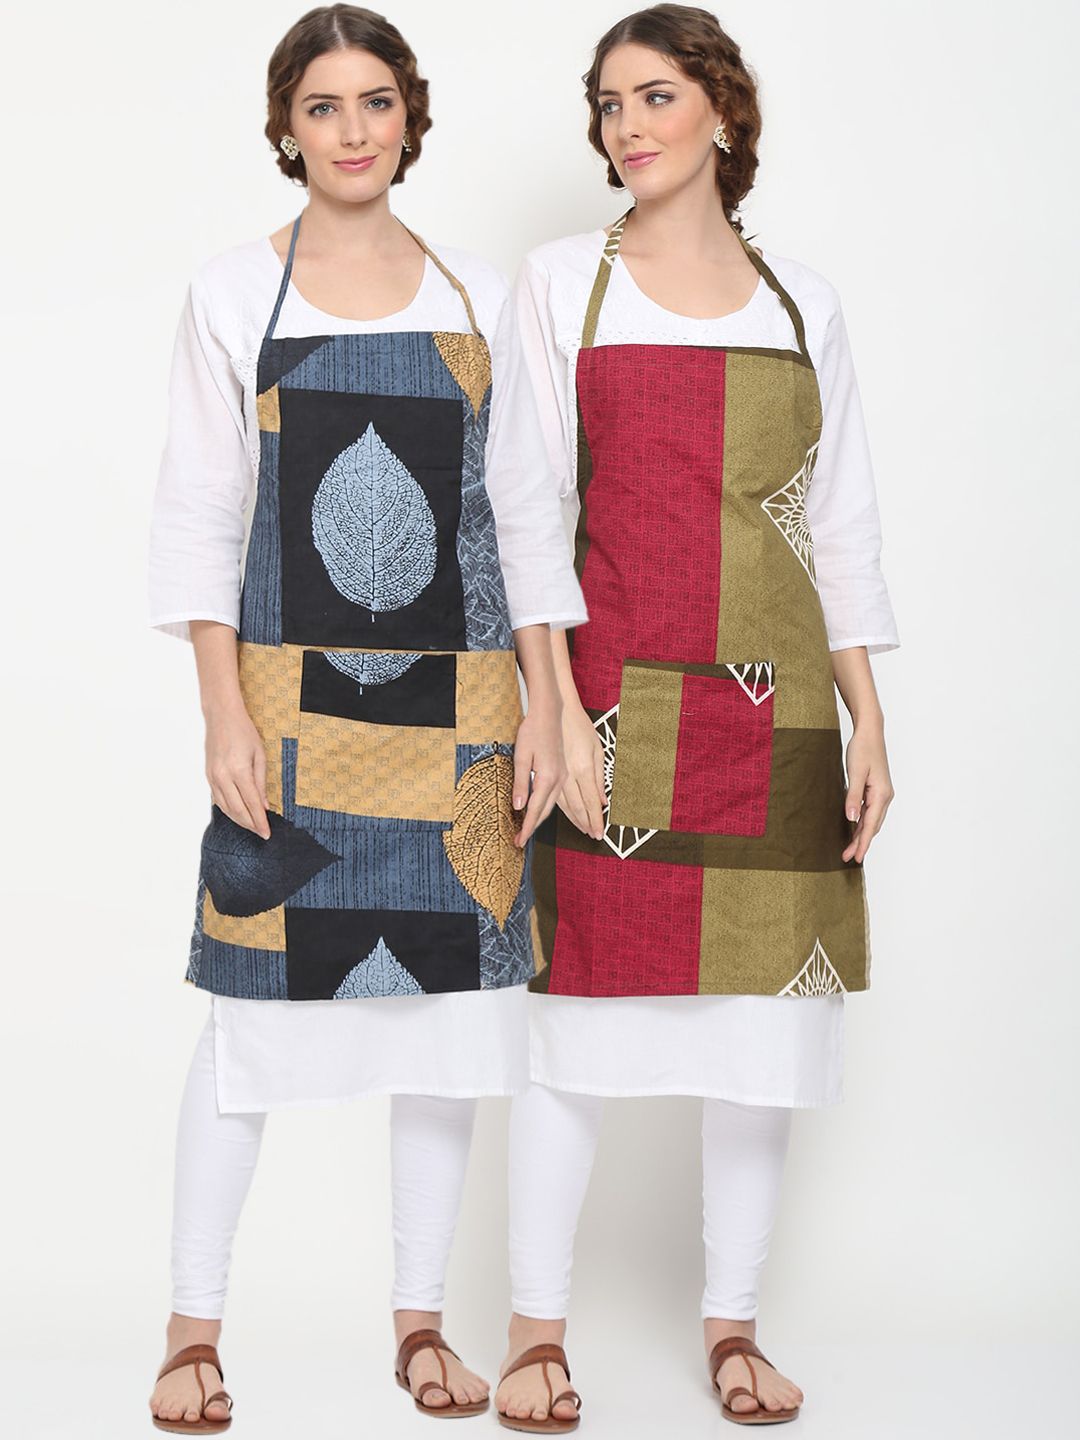 TAG 7 Unisex Pack Of 2 Printed Aprons with Pockets & 2 Napkins Price in India